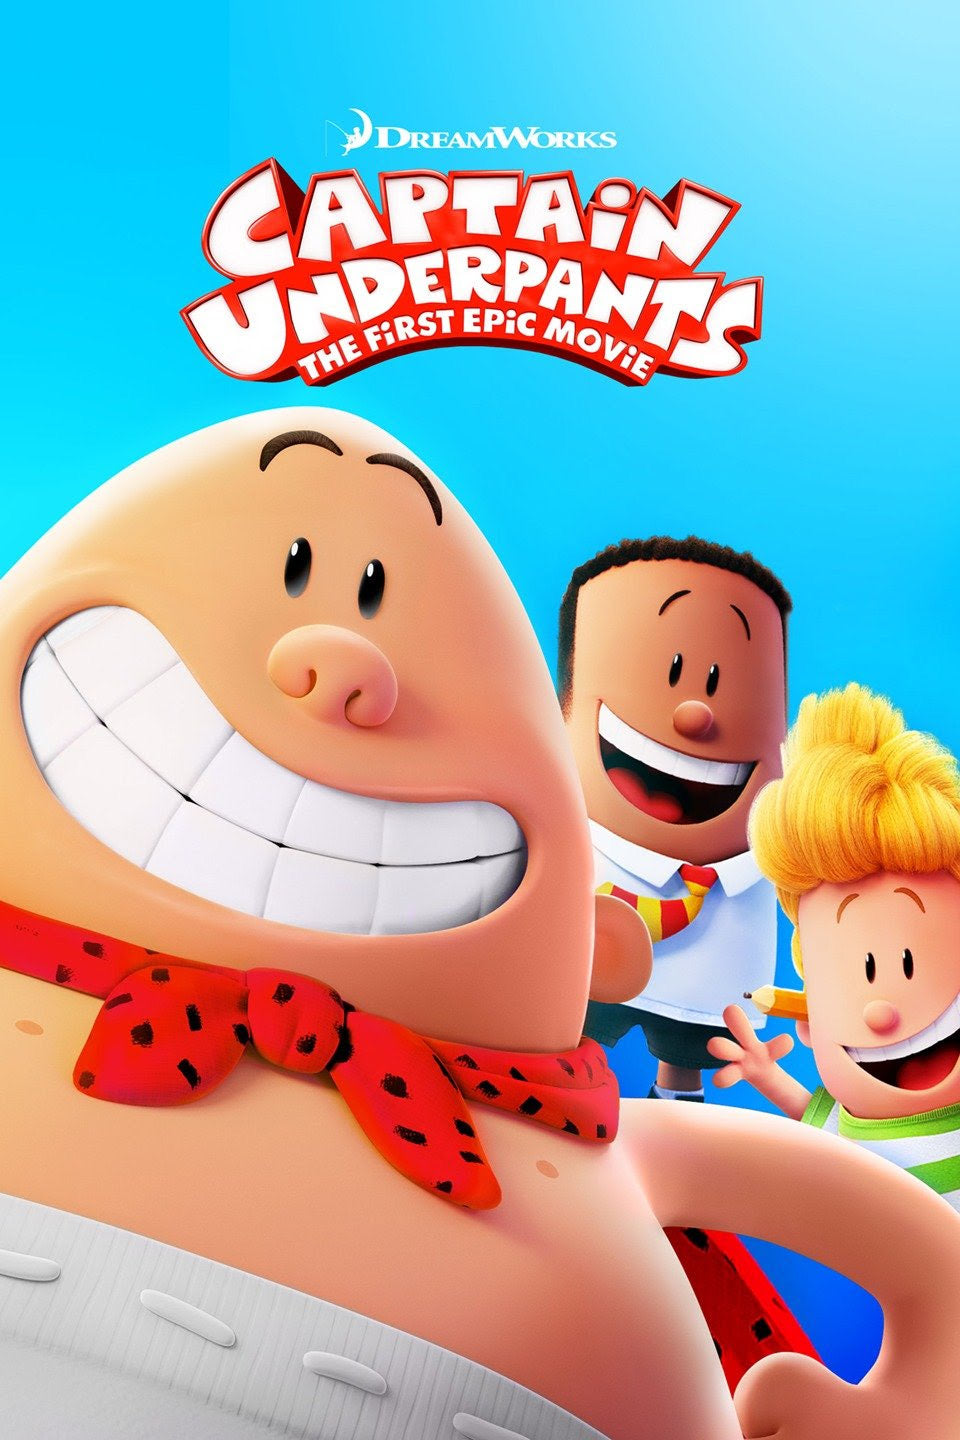 Captain Underpants: The First Epic Movie (2017) iTunes HD or Vudu / Movies Anywhere HD code